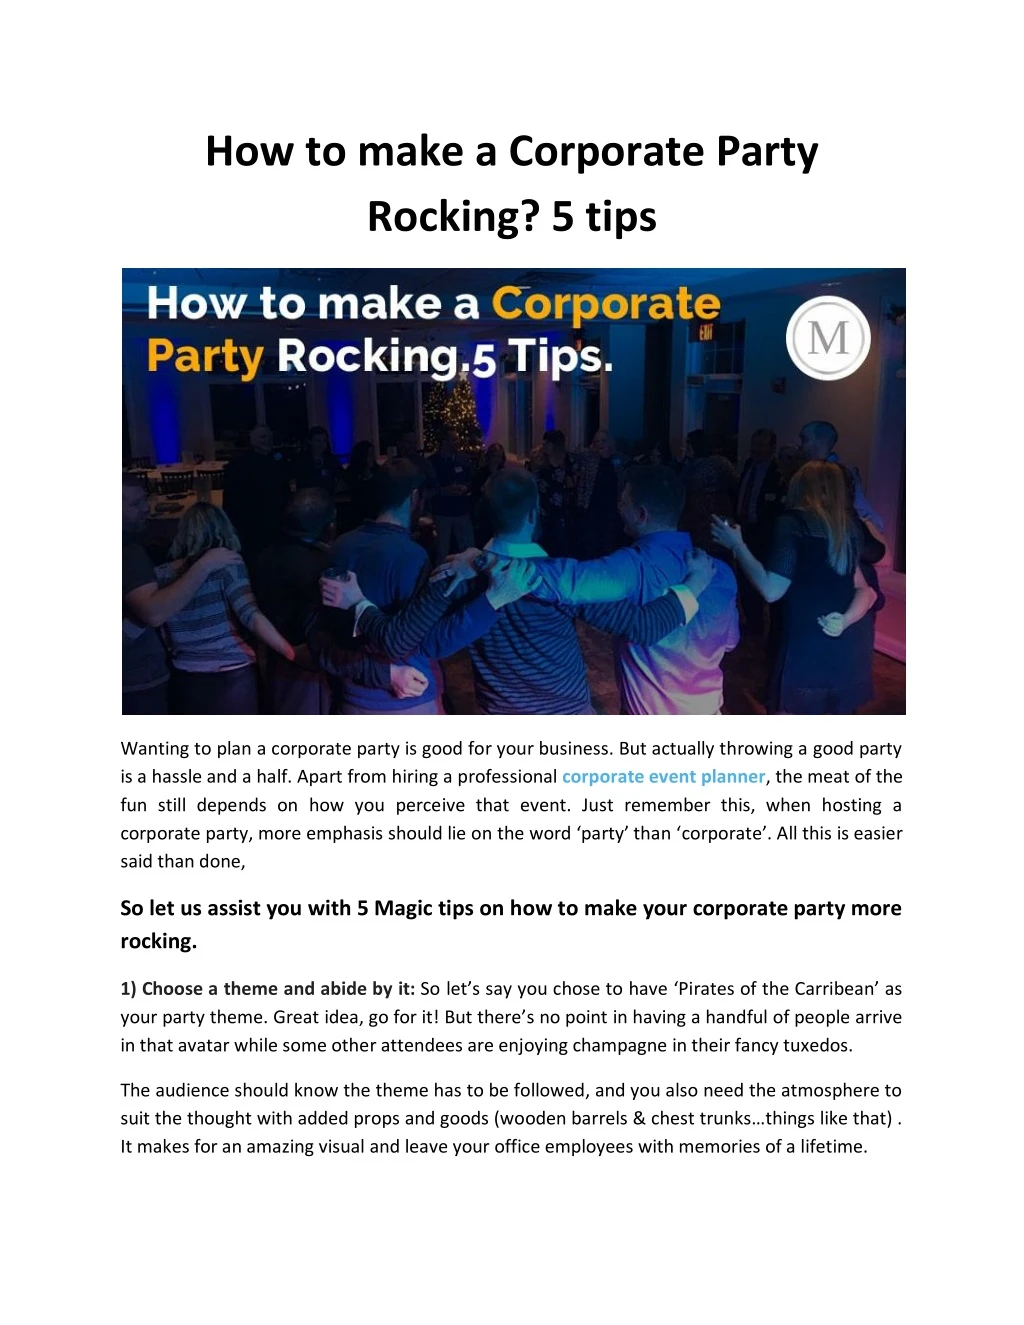 how to make a corporate party rocking 5 tips